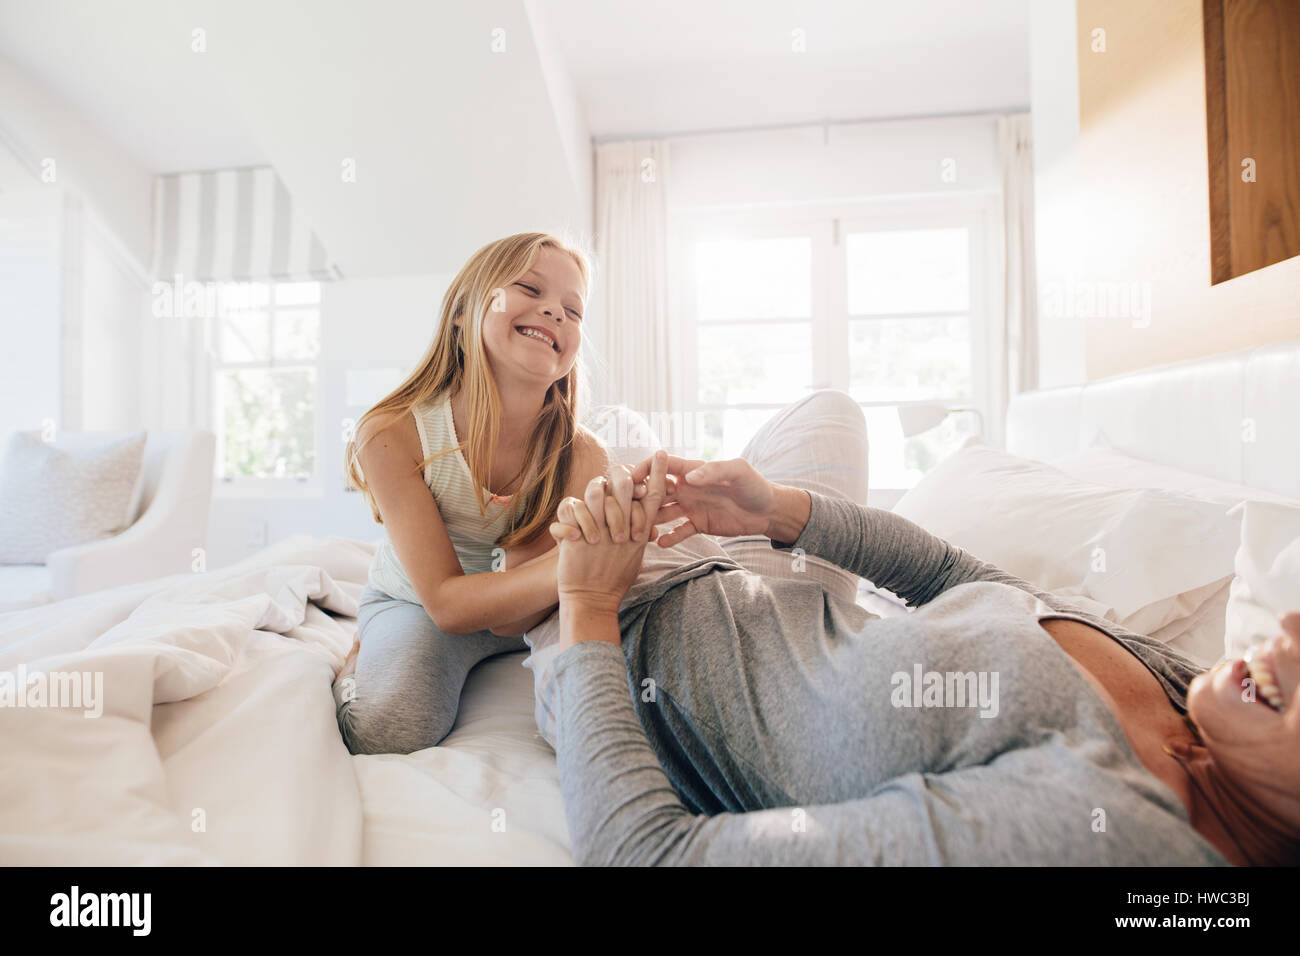 Happy little girl with her mother on bed. Mother and daughter playing in bedroom. Stock Photo